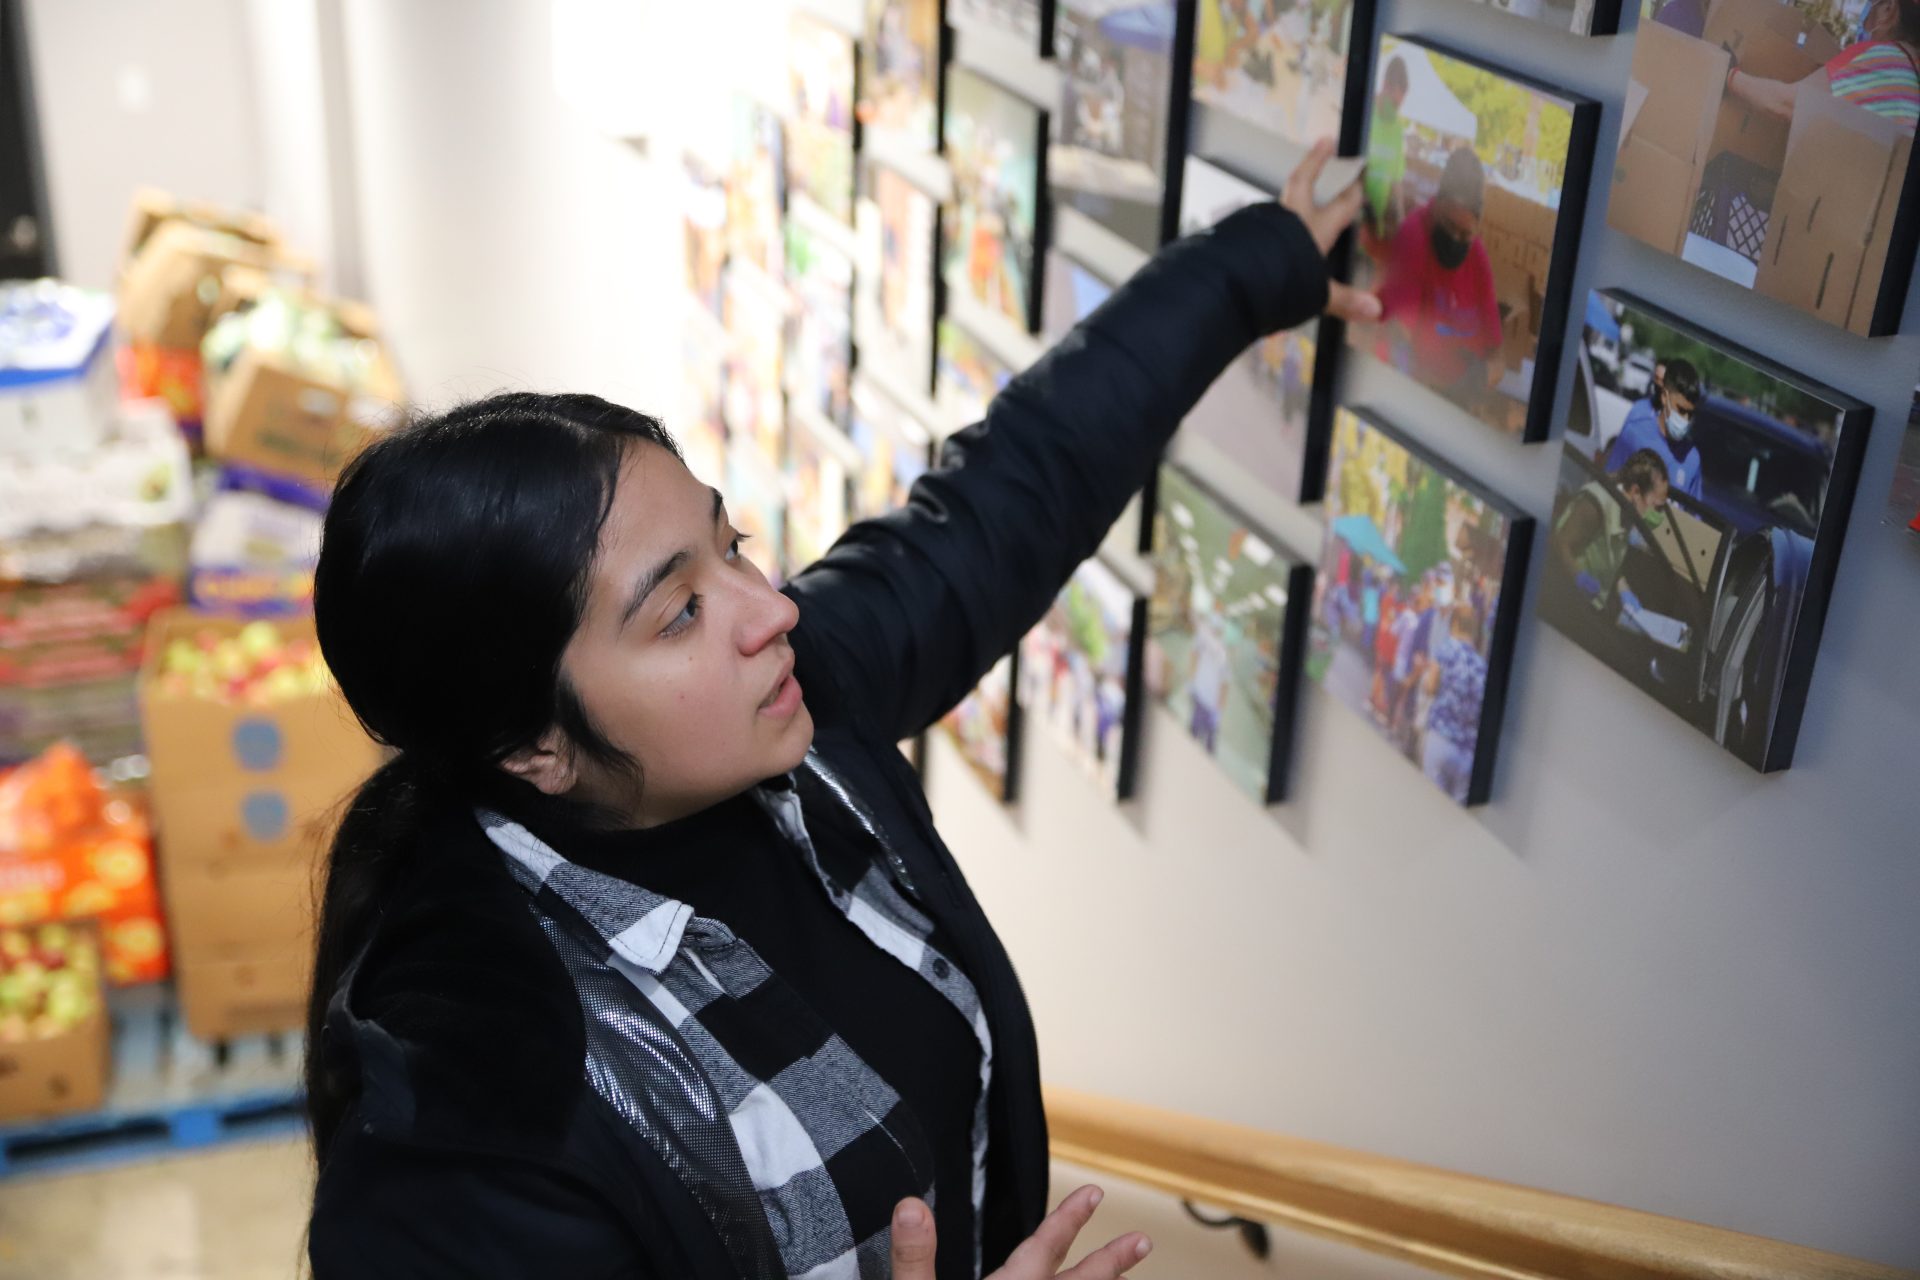 Diana Franco, the coordinator for Pan de Vida, looks at pictures and talks about the history of the food pantry in Little Village on Nov. 1. Franco has been working with Pan de Vida for years now and said she loves giving back to her community.